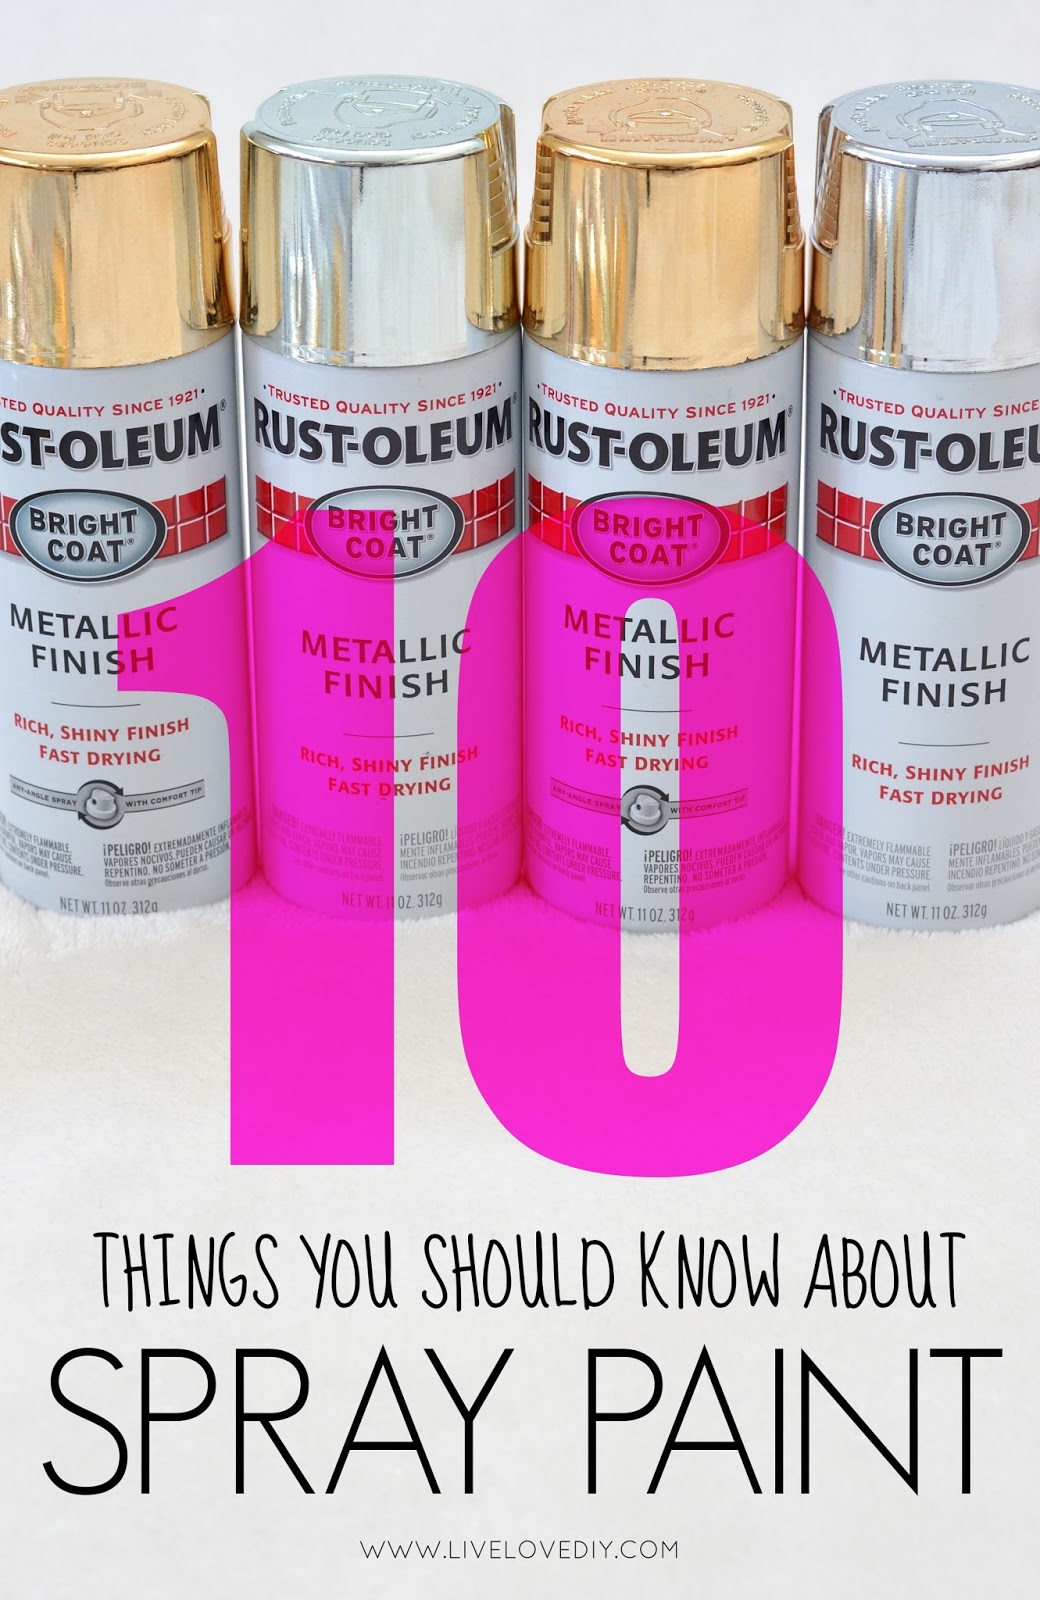 Everything you need to know about spray paint all in one place! This is a MUST-PIN!